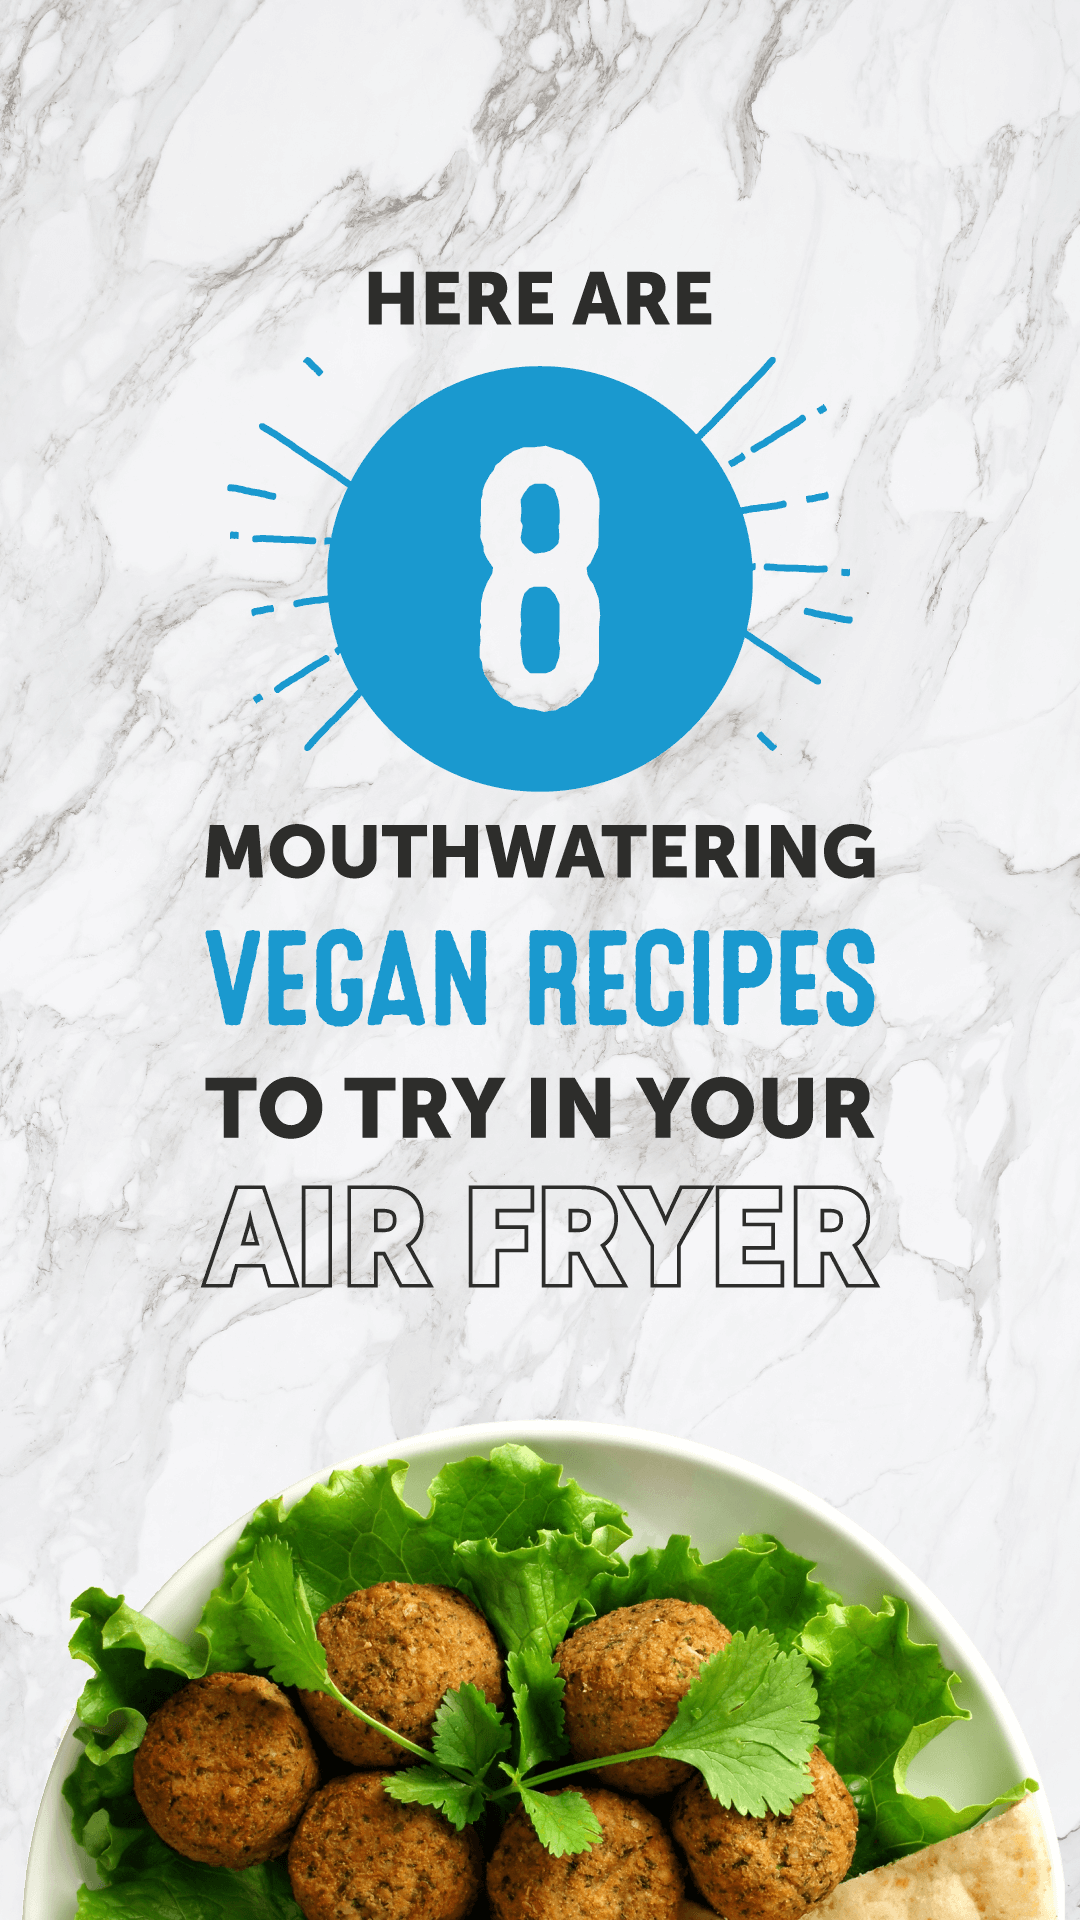 Here Are 8 Mouthwatering Vegan Recipes to Try in Your Air Fryer